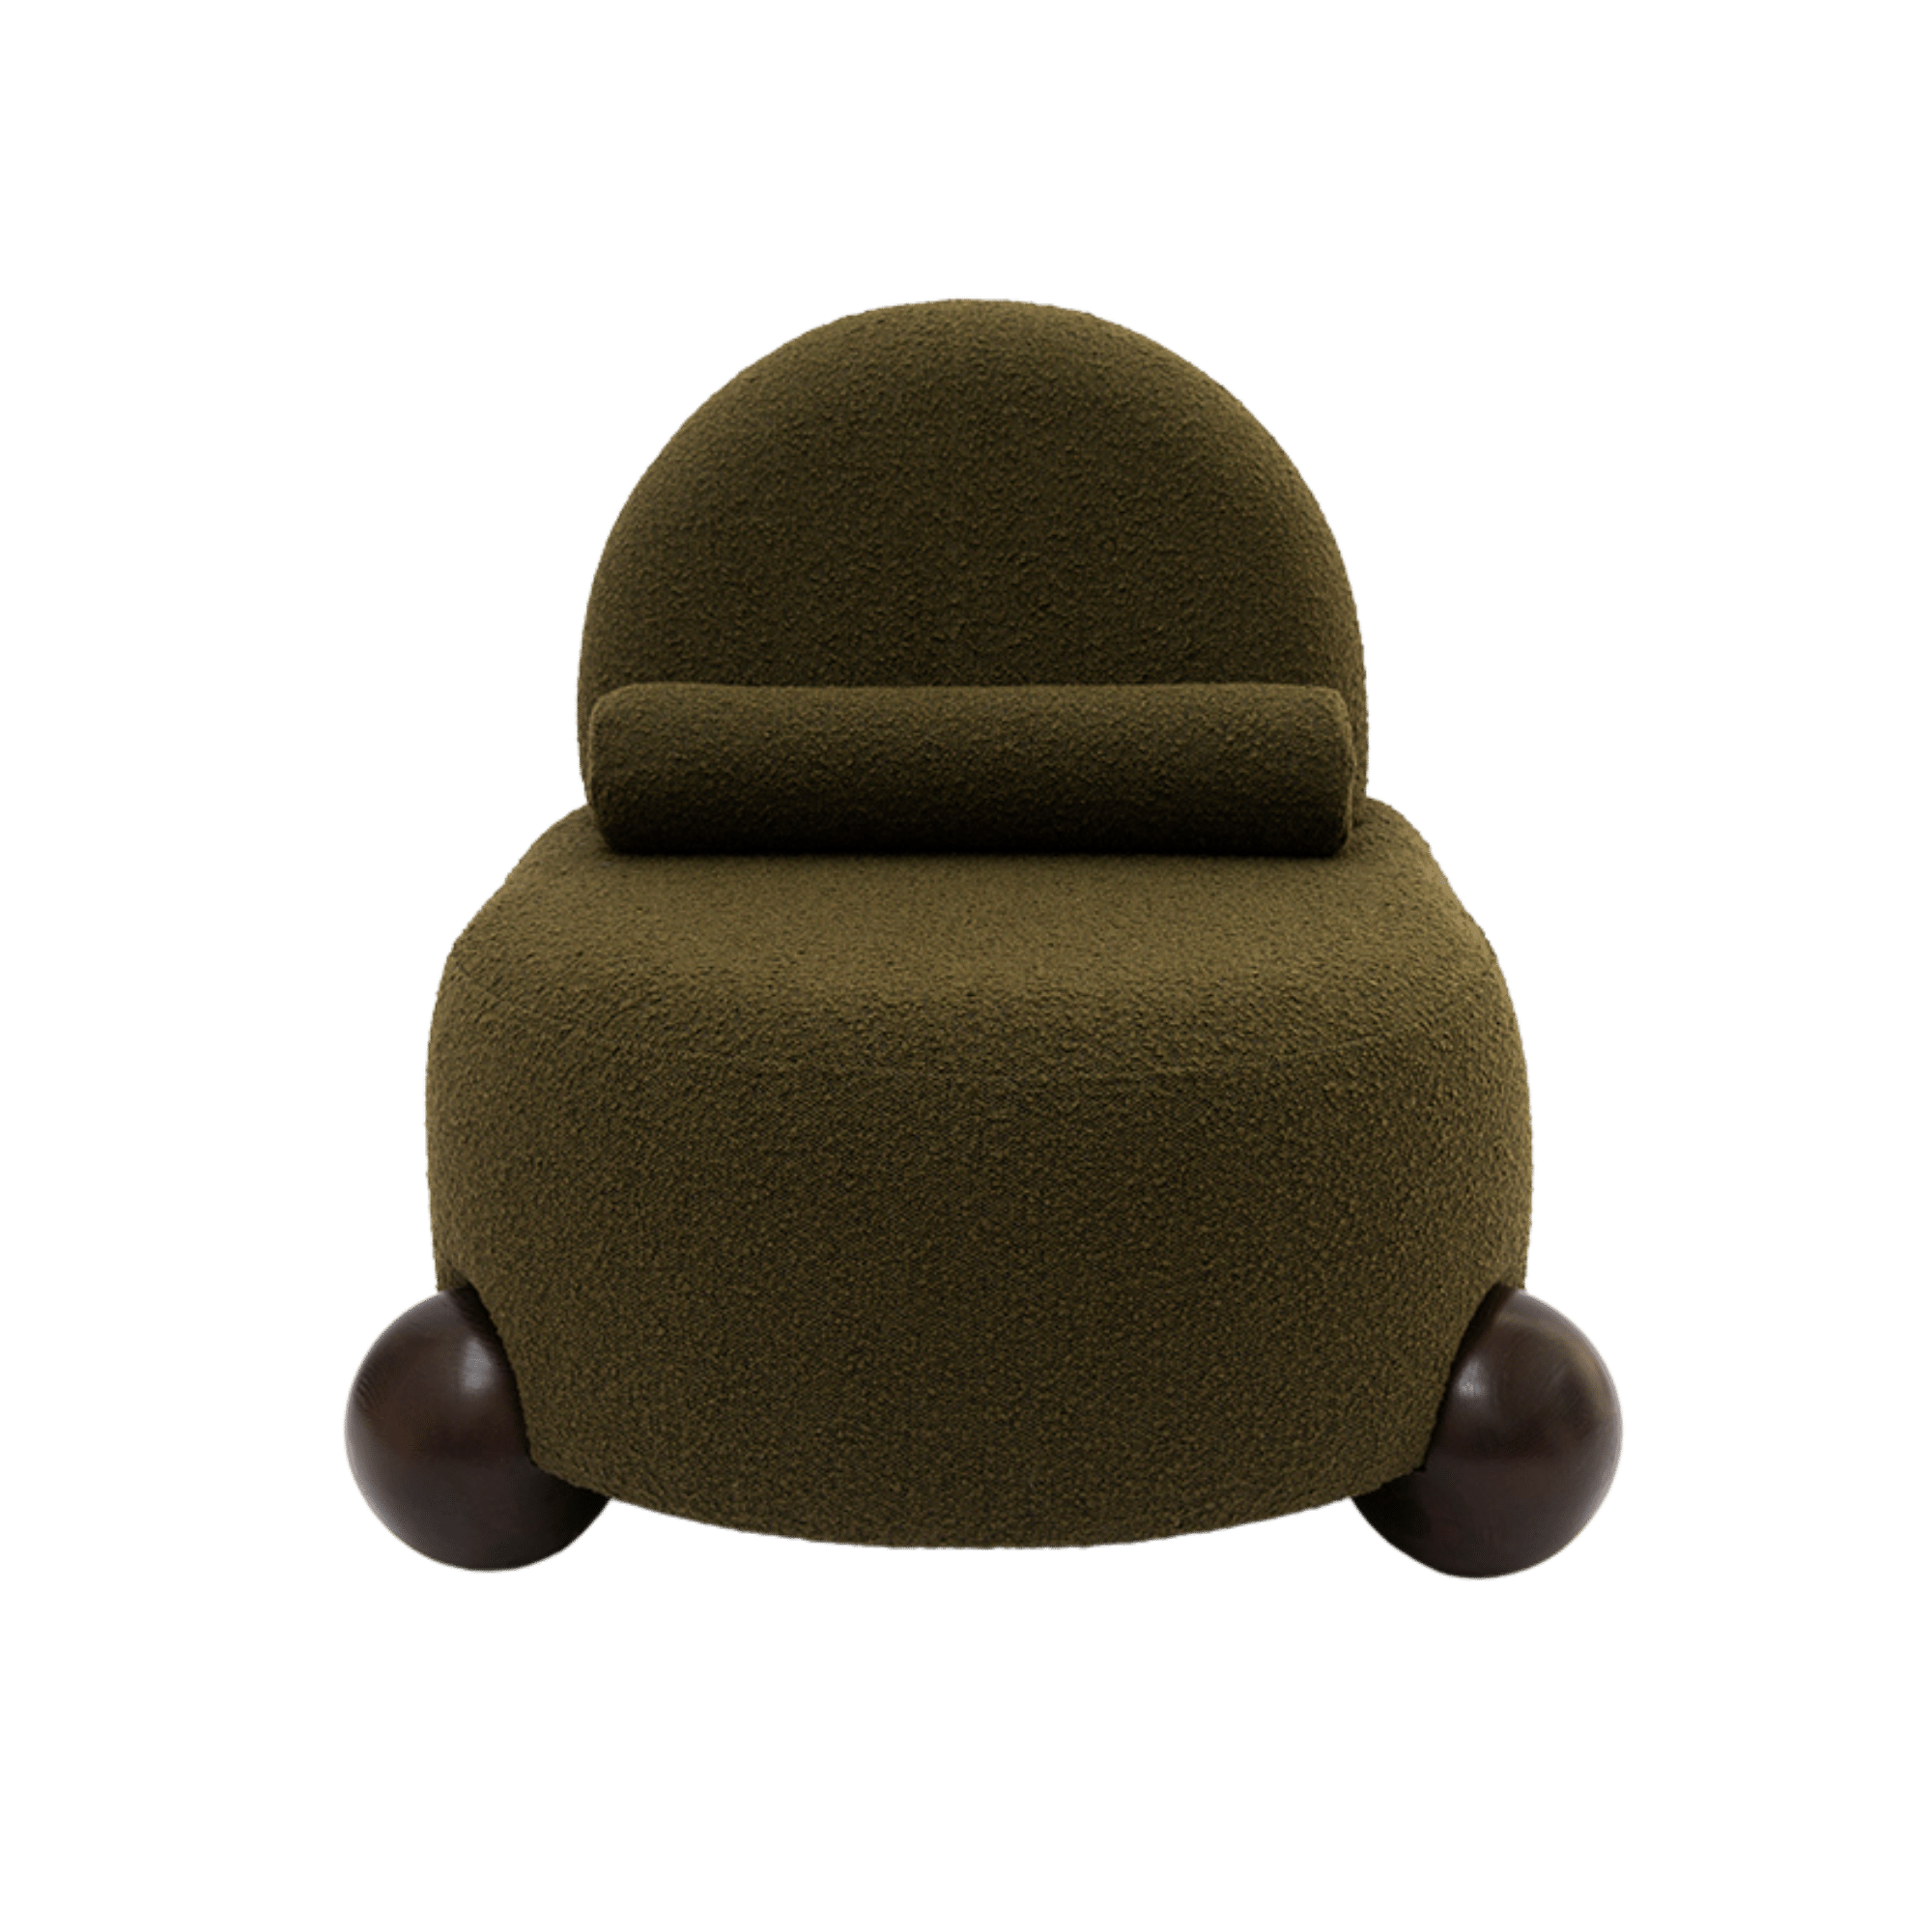 Fauteuil Object076